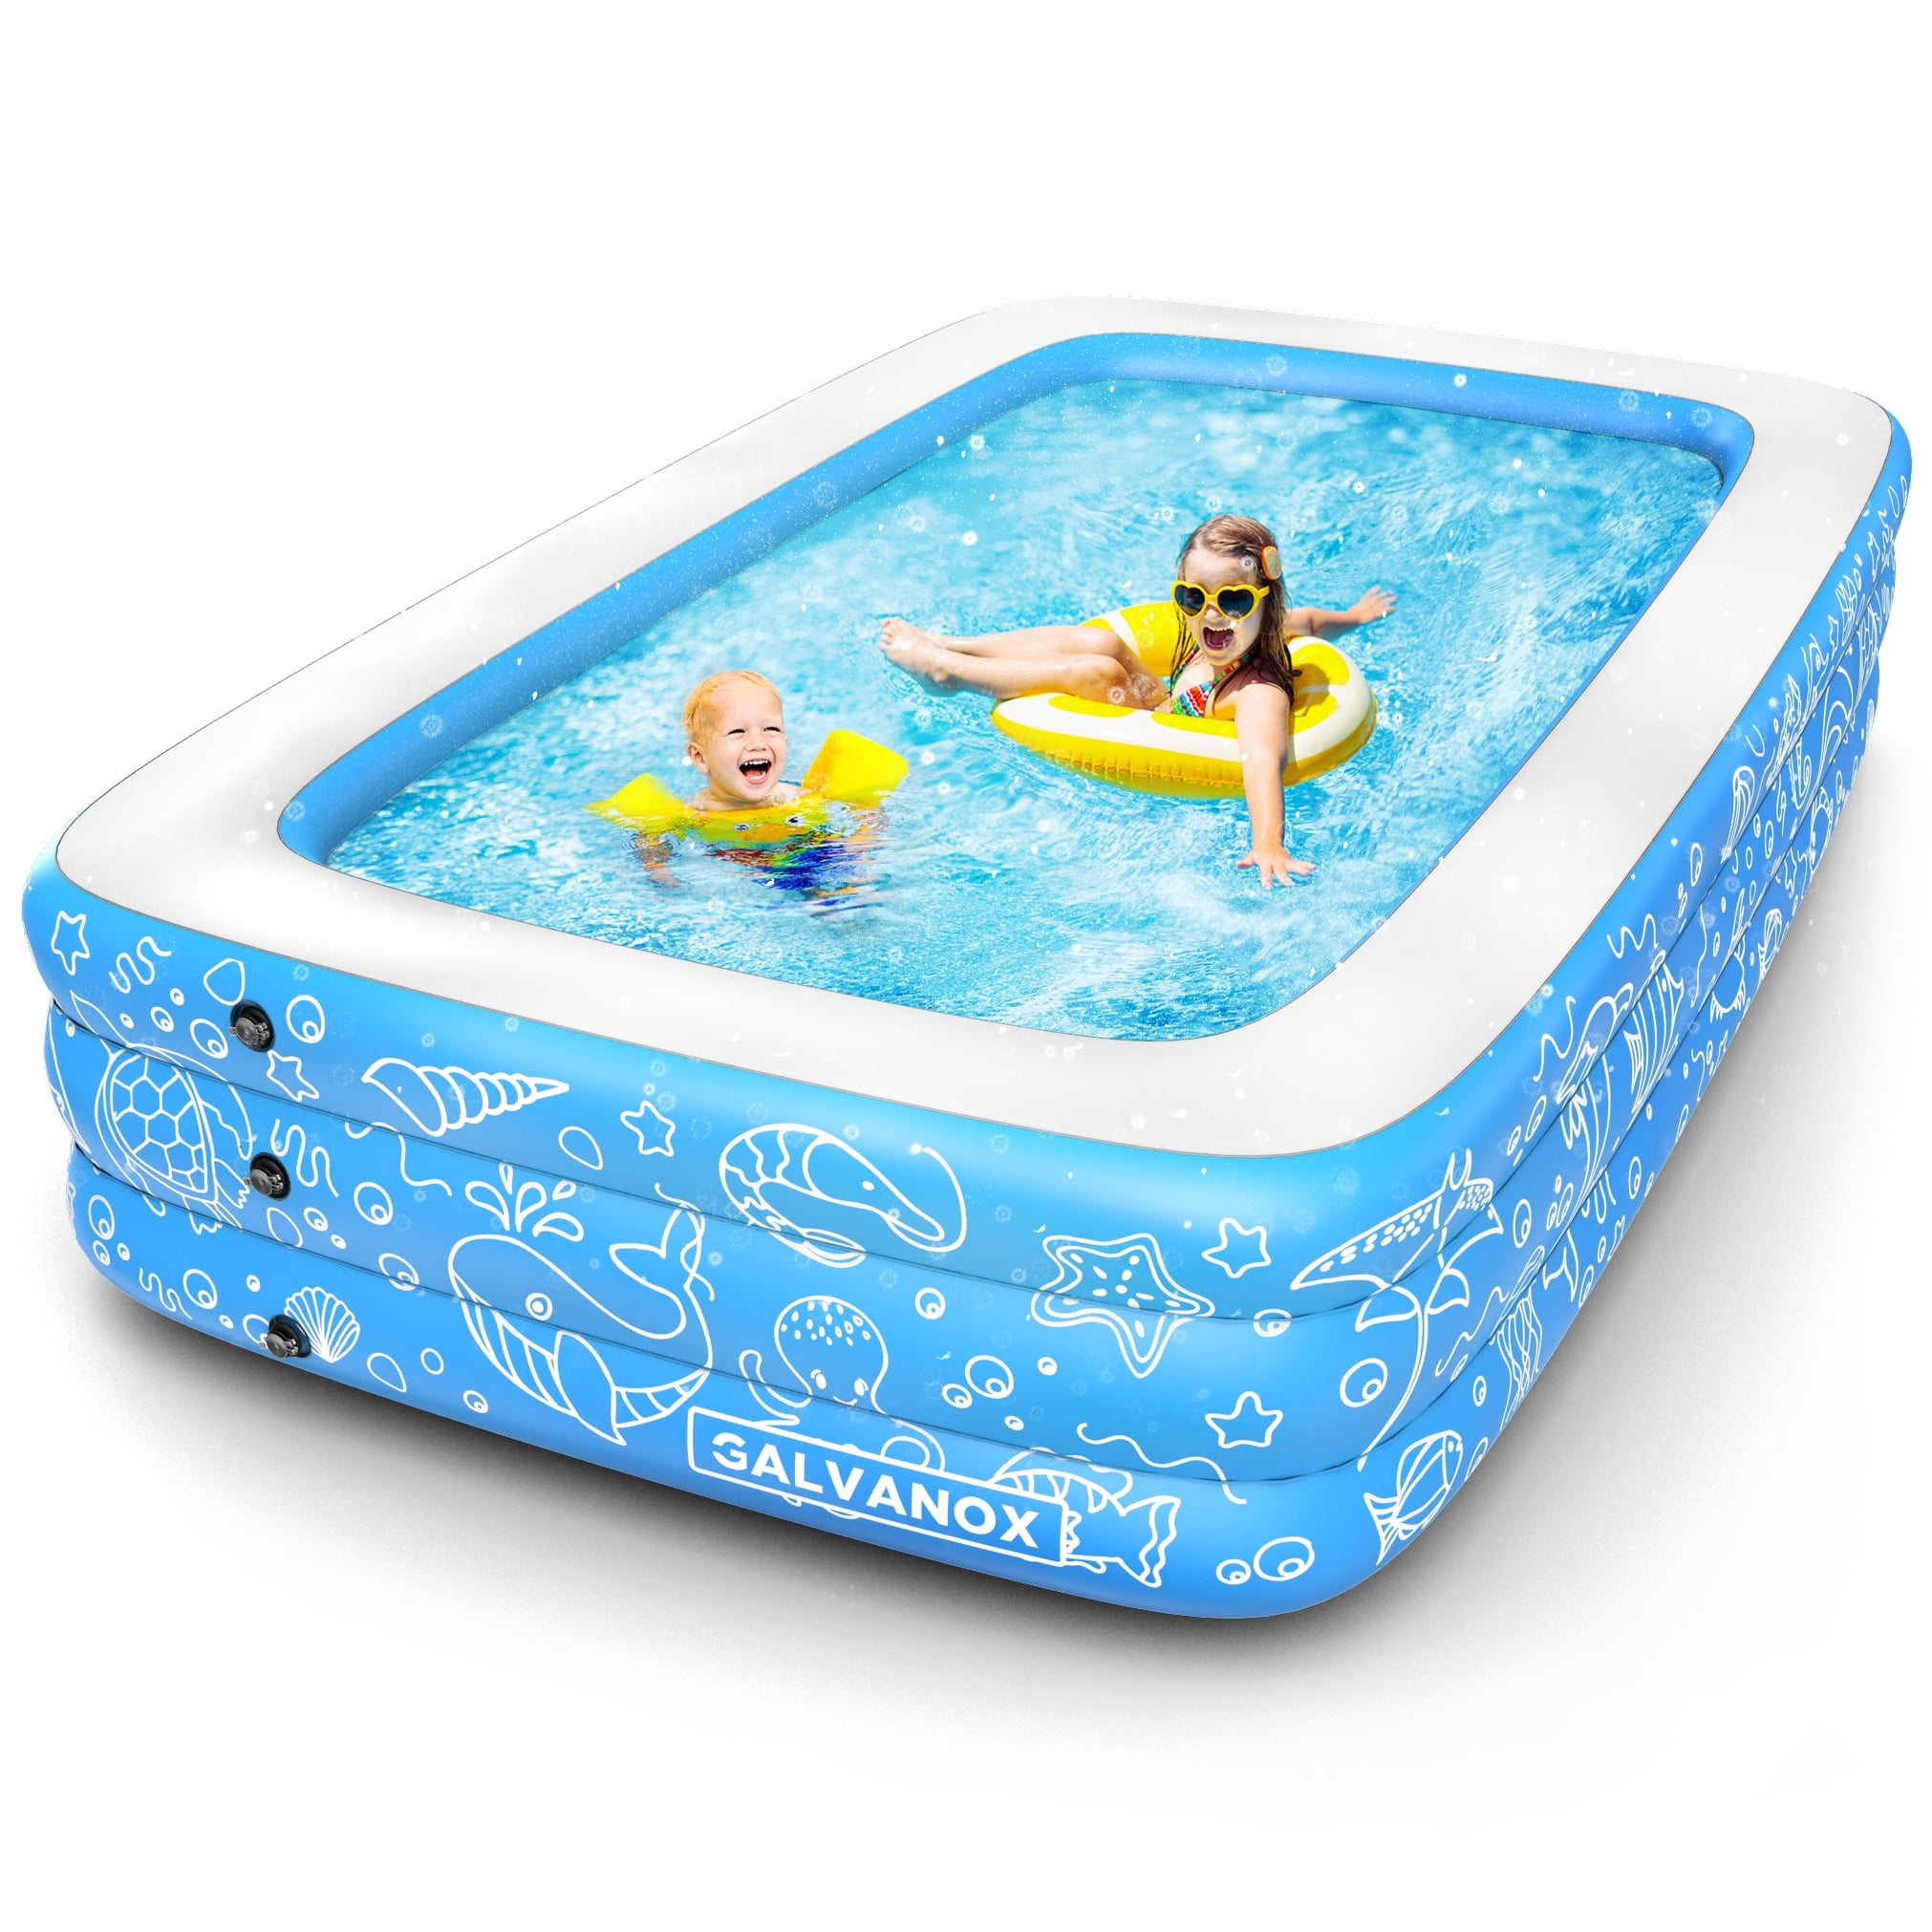 Details about   Family 2.6M Large Pools Bathtub Children Inflatable Swimming Pool Ground Pool 